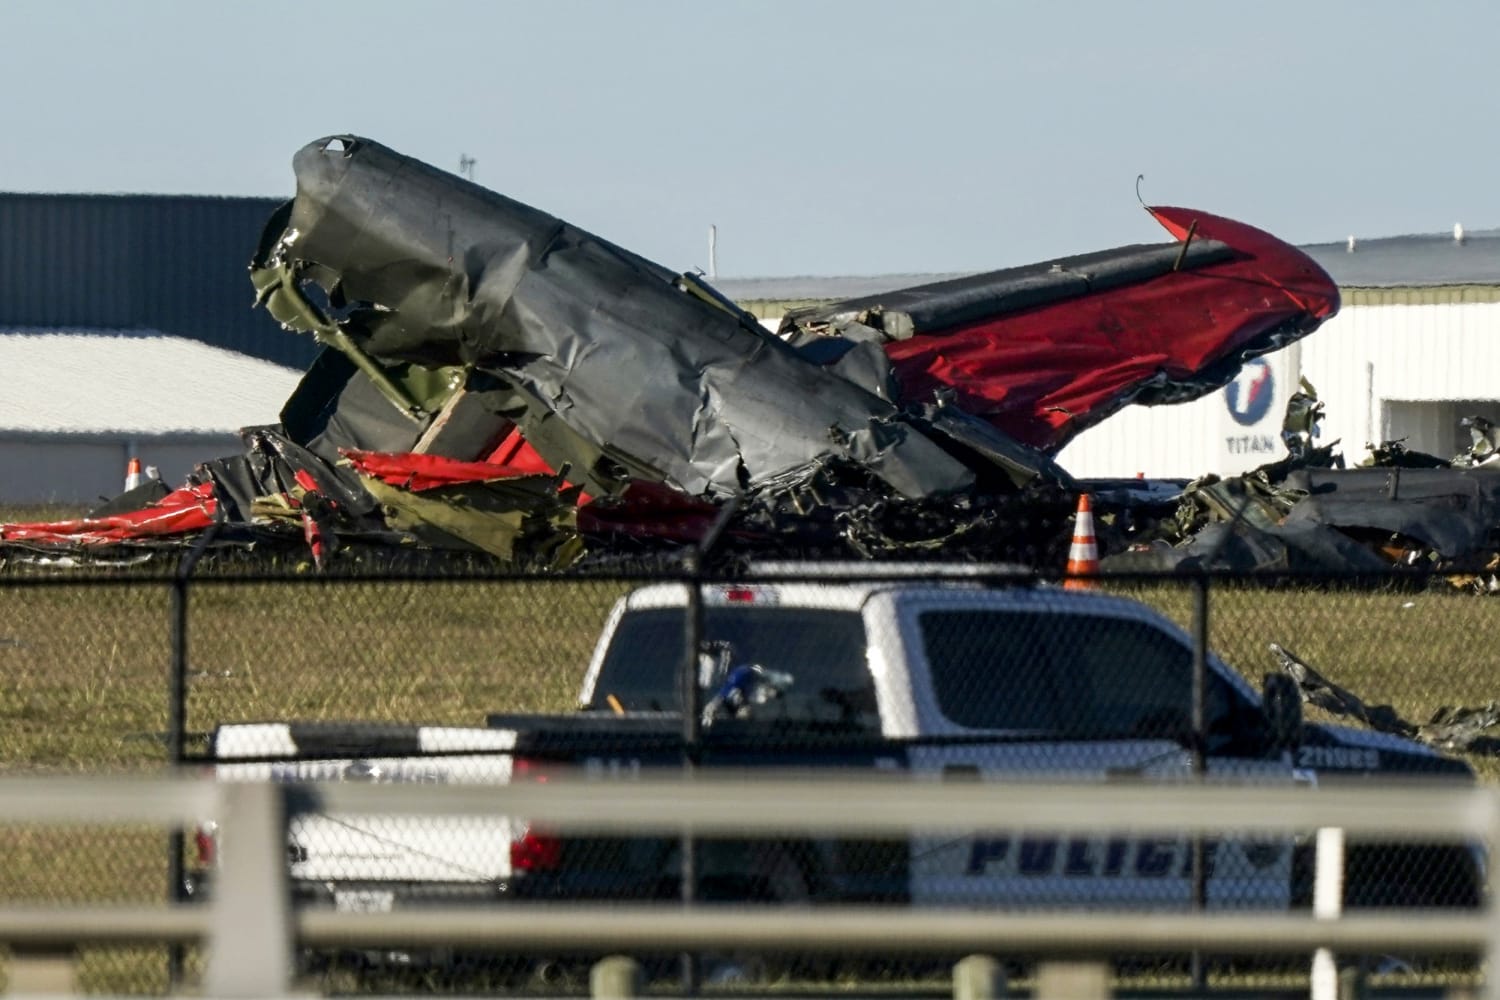 Old aircraft in Dallas air collision lacked black boxes, so cause may be elusive